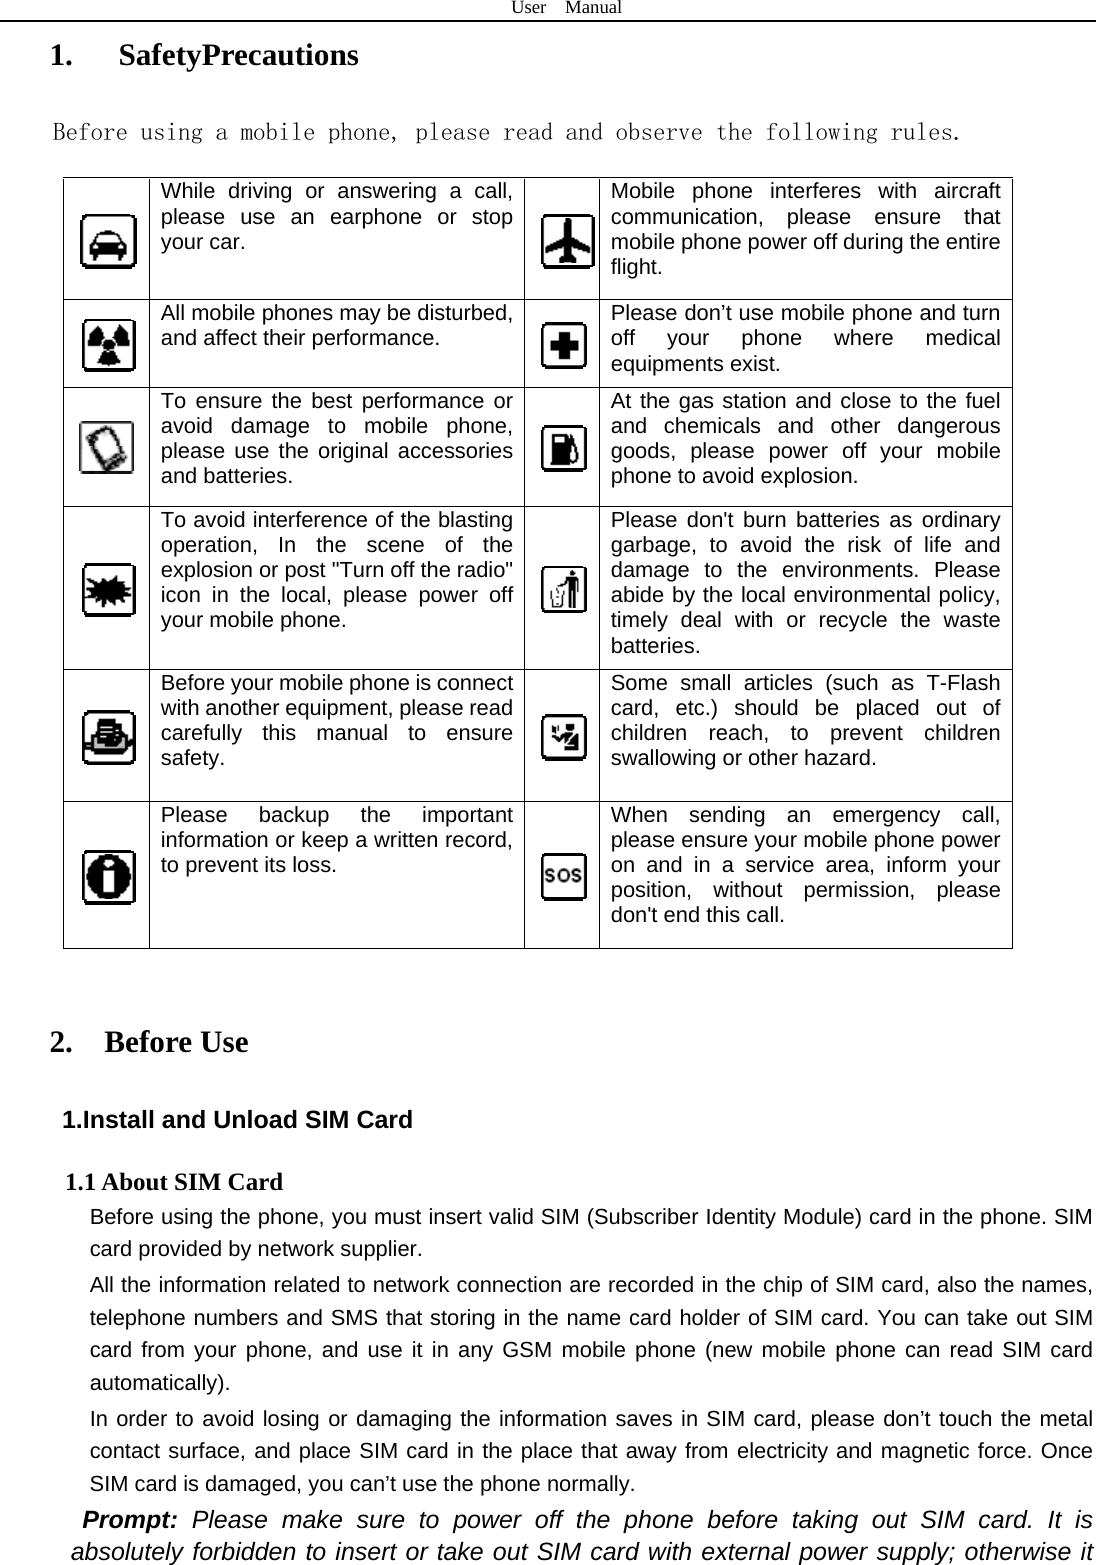 User  Manual  1.   SafetyPrecautions Before using a mobile phone, please read and observe the following rules.  While driving or answering a call, please use an earphone or stop your car.   Mobile phone interferes with aircraft communication, please ensure that mobile phone power off during the entire flight.  All mobile phones may be disturbed, and affect their performance.   Please don’t use mobile phone and turn off your phone where medical equipments exist.    To ensure the best performance or avoid damage to mobile phone, please use the original accessories and batteries.   At the gas station and close to the fuel and chemicals and other dangerous goods, please power off your mobile phone to avoid explosion.  To avoid interference of the blasting operation, In the scene of the explosion or post &quot;Turn off the radio&quot; icon in the local, please power off your mobile phone.   Please don&apos;t burn batteries as ordinary garbage, to avoid the risk of life and damage to the environments. Please abide by the local environmental policy, timely deal with or recycle the waste batteries.  Before your mobile phone is connect with another equipment, please read carefully this manual to ensure safety.   Some small articles (such as T-Flash card, etc.) should be placed out of children reach, to prevent children swallowing or other hazard.  Please backup the important information or keep a written record, to prevent its loss.   When sending an emergency call, please ensure your mobile phone power on and in a service area, inform your position, without permission, please don&apos;t end this call.  2.  Before Use 1.Install and Unload SIM Card 1.1 About SIM Card Before using the phone, you must insert valid SIM (Subscriber Identity Module) card in the phone. SIM card provided by network supplier. All the information related to network connection are recorded in the chip of SIM card, also the names, telephone numbers and SMS that storing in the name card holder of SIM card. You can take out SIM card from your phone, and use it in any GSM mobile phone (new mobile phone can read SIM card automatically).  In order to avoid losing or damaging the information saves in SIM card, please don’t touch the metal contact surface, and place SIM card in the place that away from electricity and magnetic force. Once SIM card is damaged, you can’t use the phone normally.     Prompt: Please make sure to power off the phone before taking out SIM card. It is absolutely forbidden to insert or take out SIM card with external power supply; otherwise it 